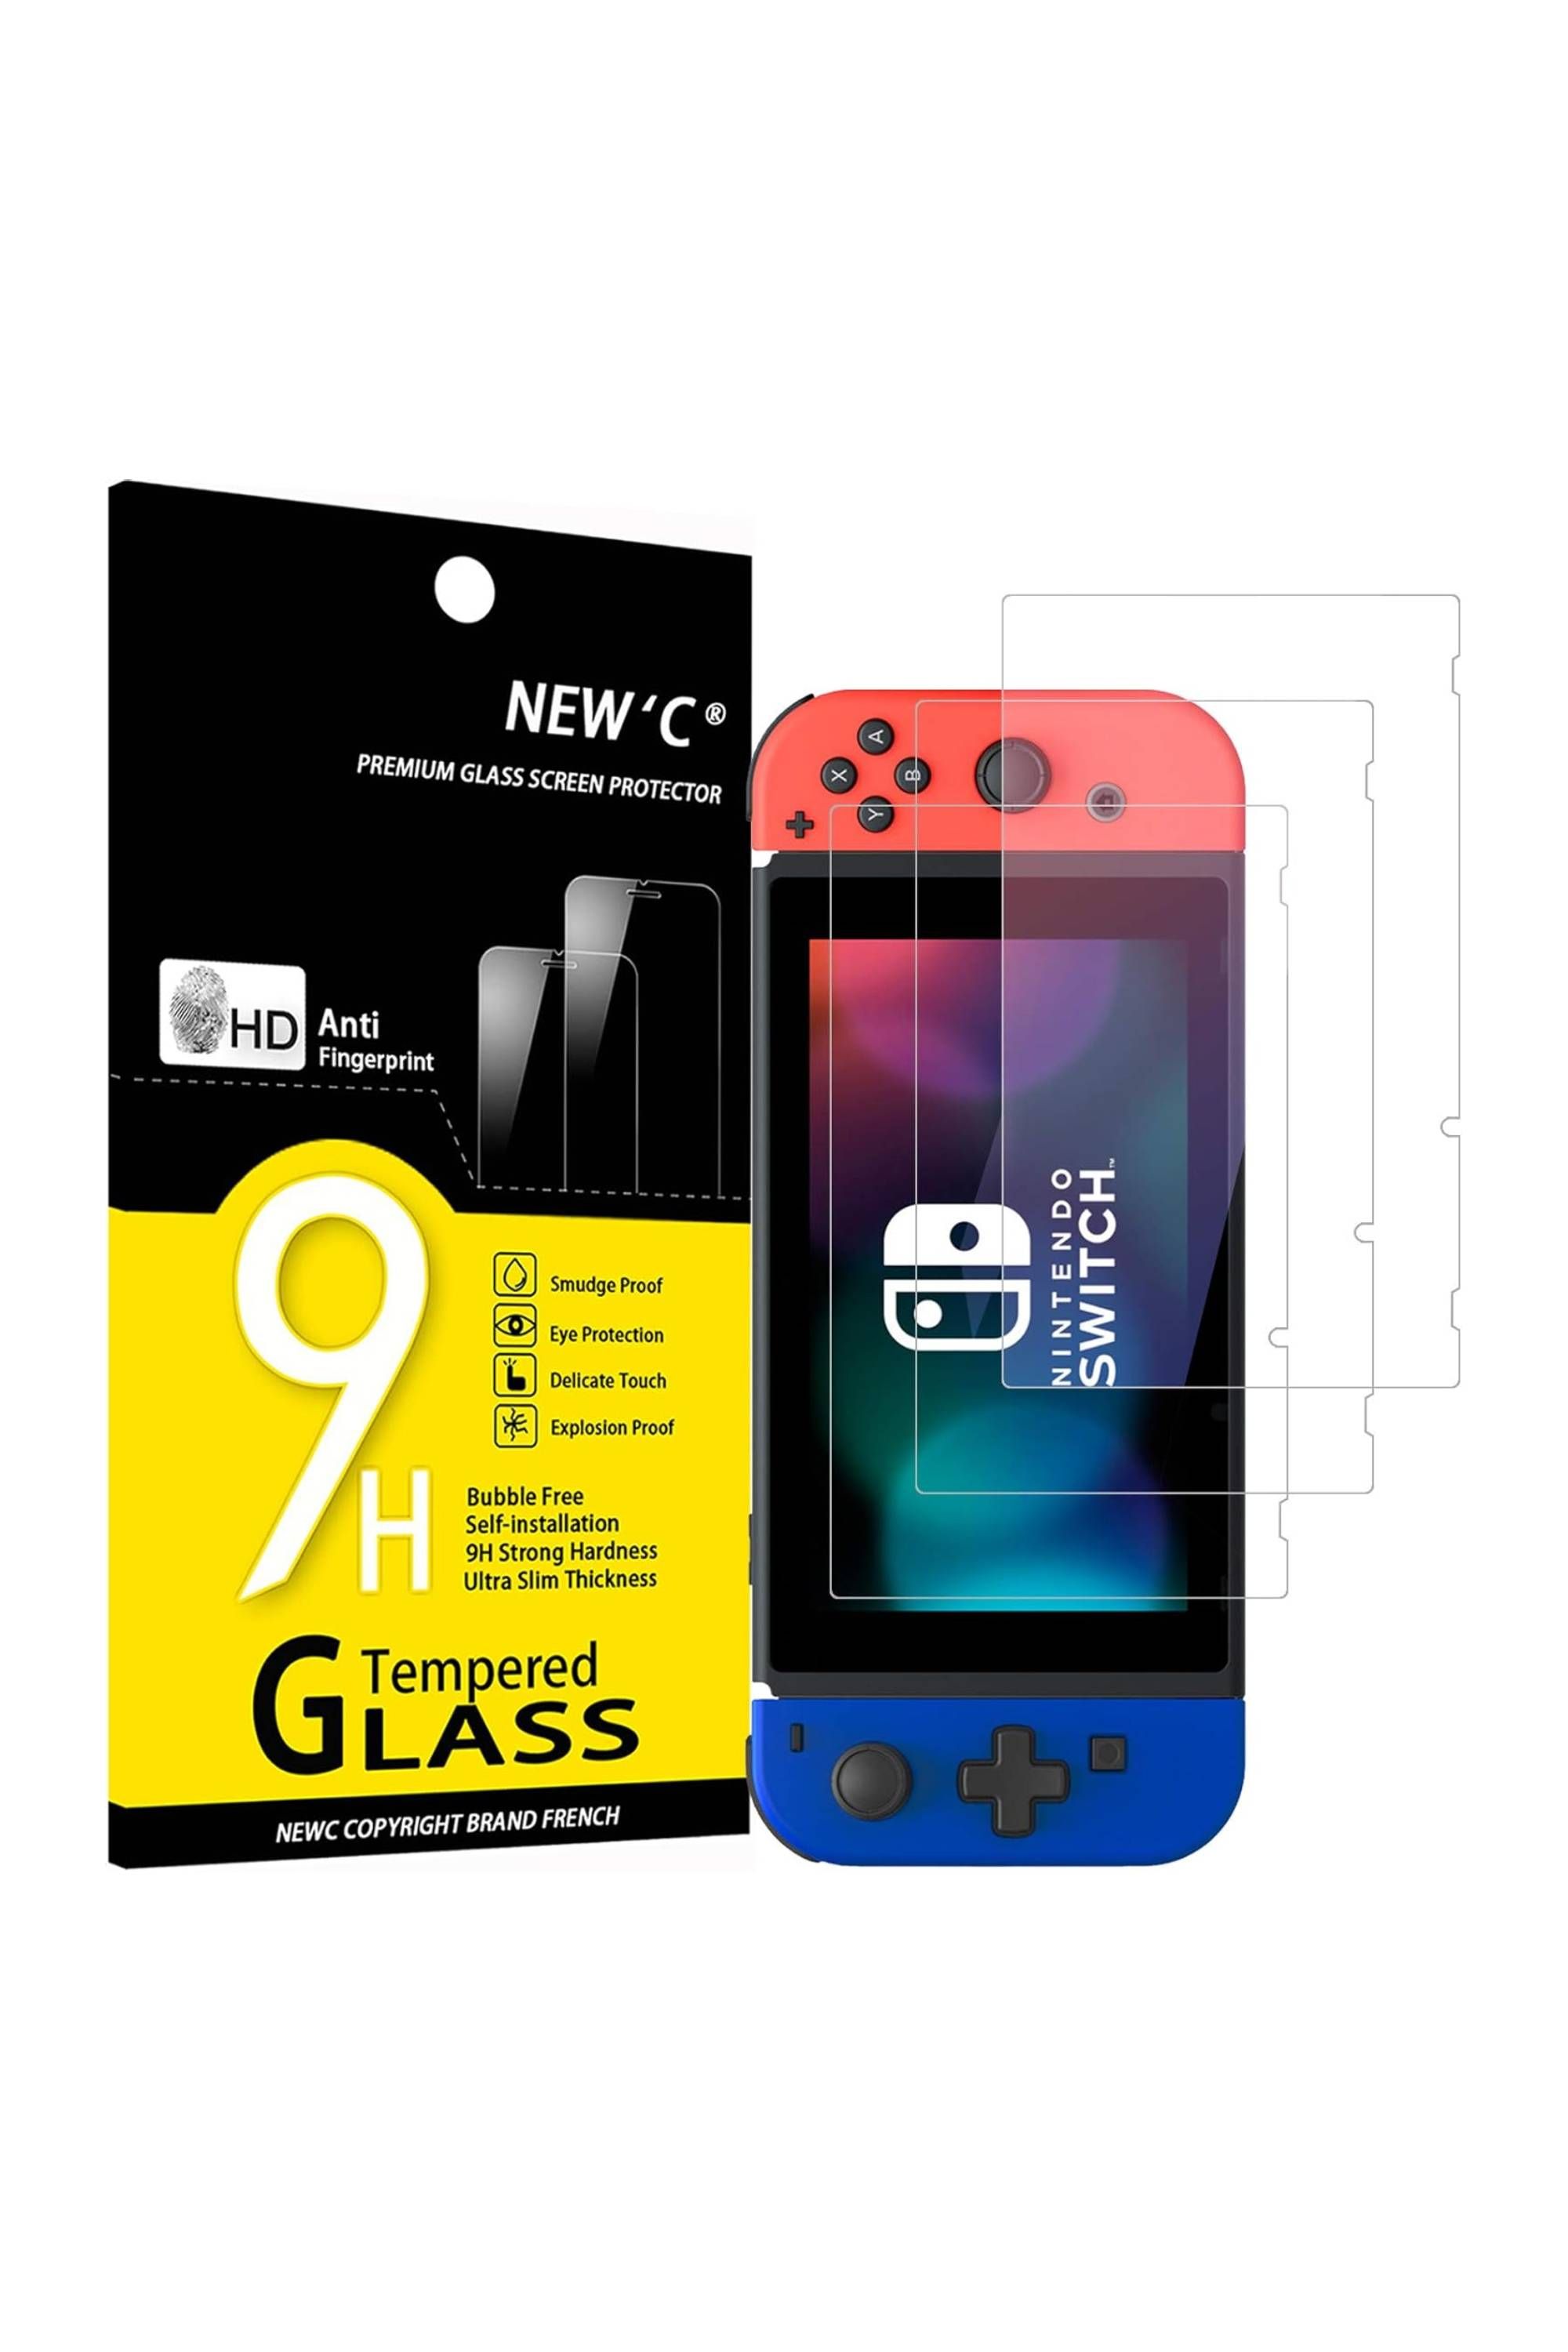 NEW'C 3-Pack Tempered Glass Screen Protector For Nintendo Switch